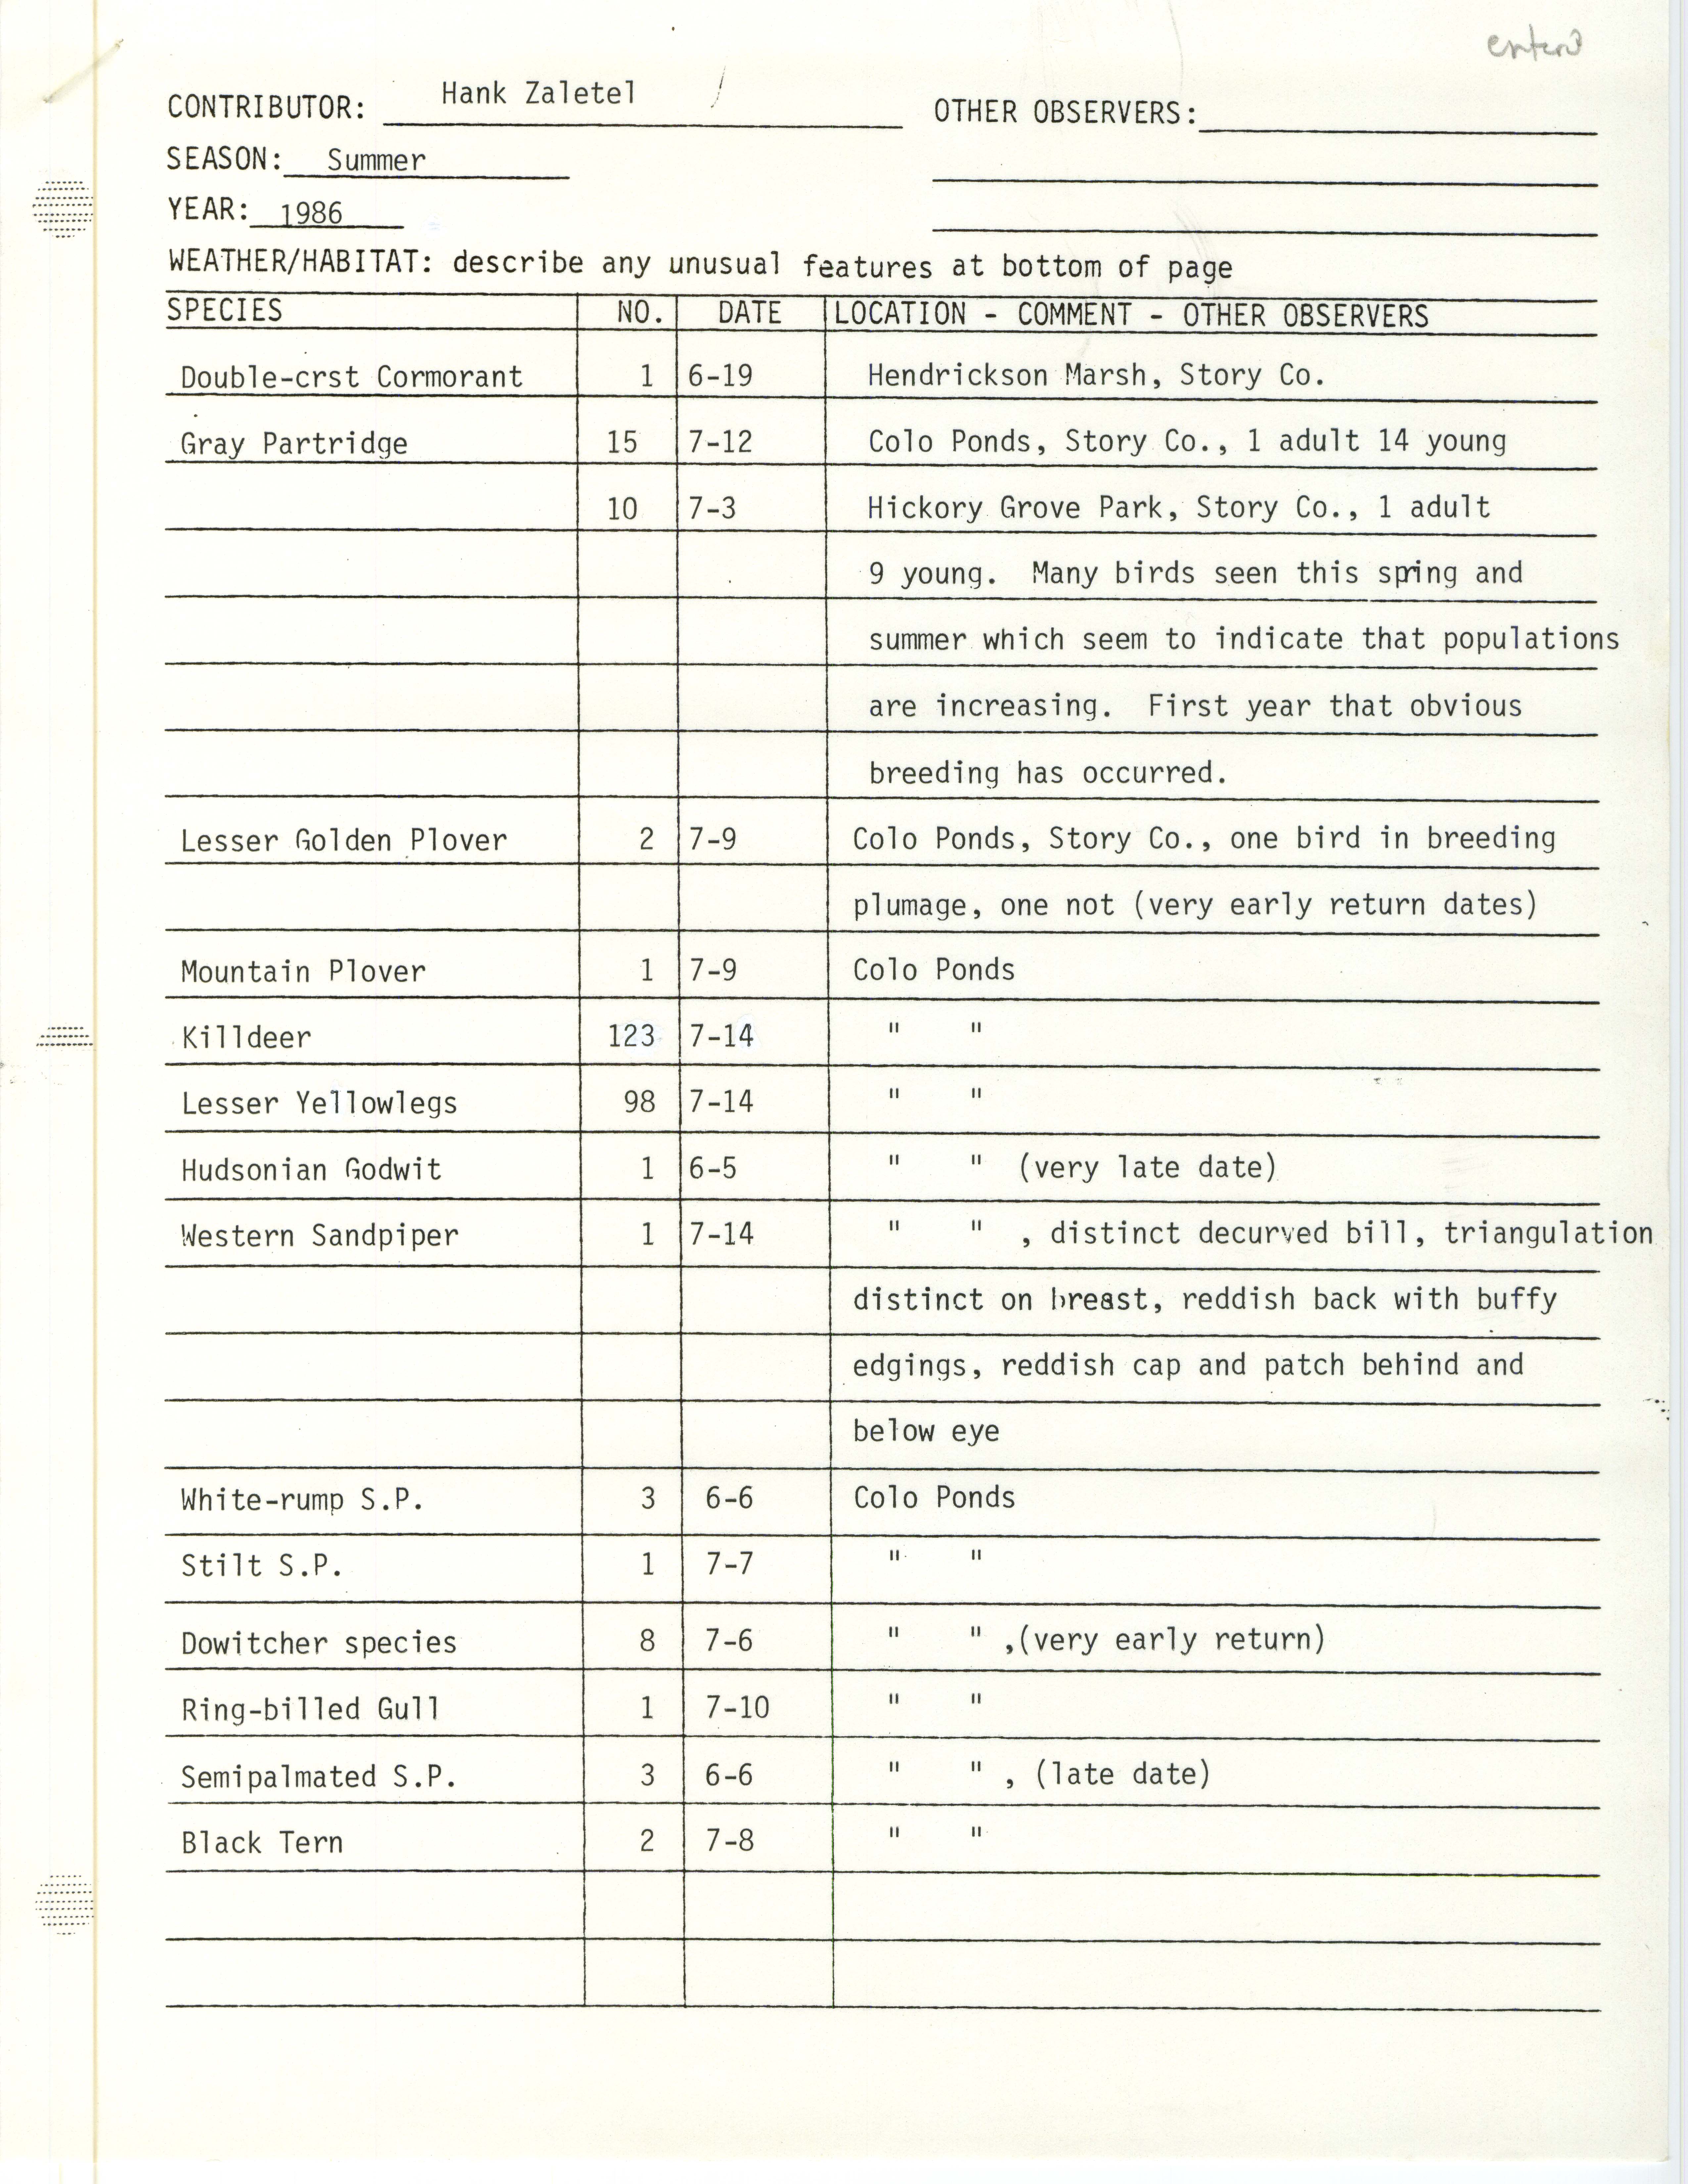 Field notes contributed by Hank Zaletel, summer 1986